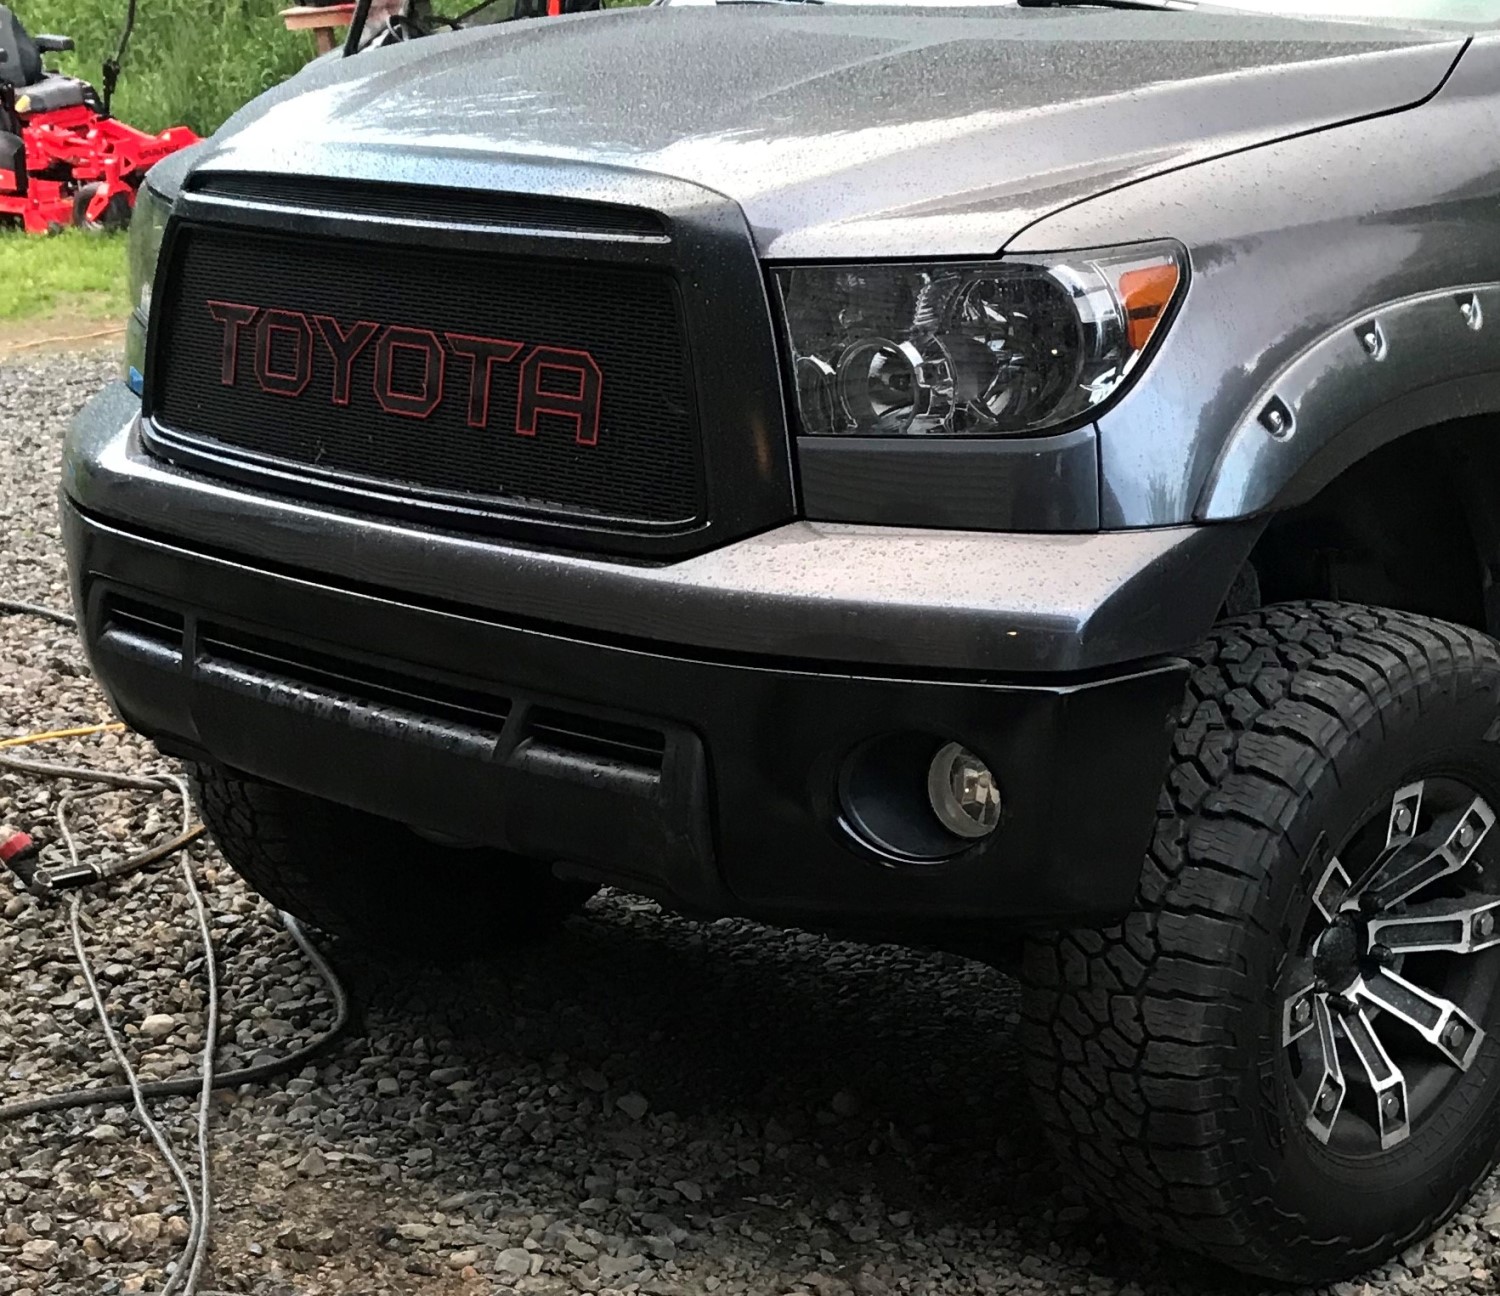 2010-13 Toyota Tundra Grill Mesh with Big Letters #3